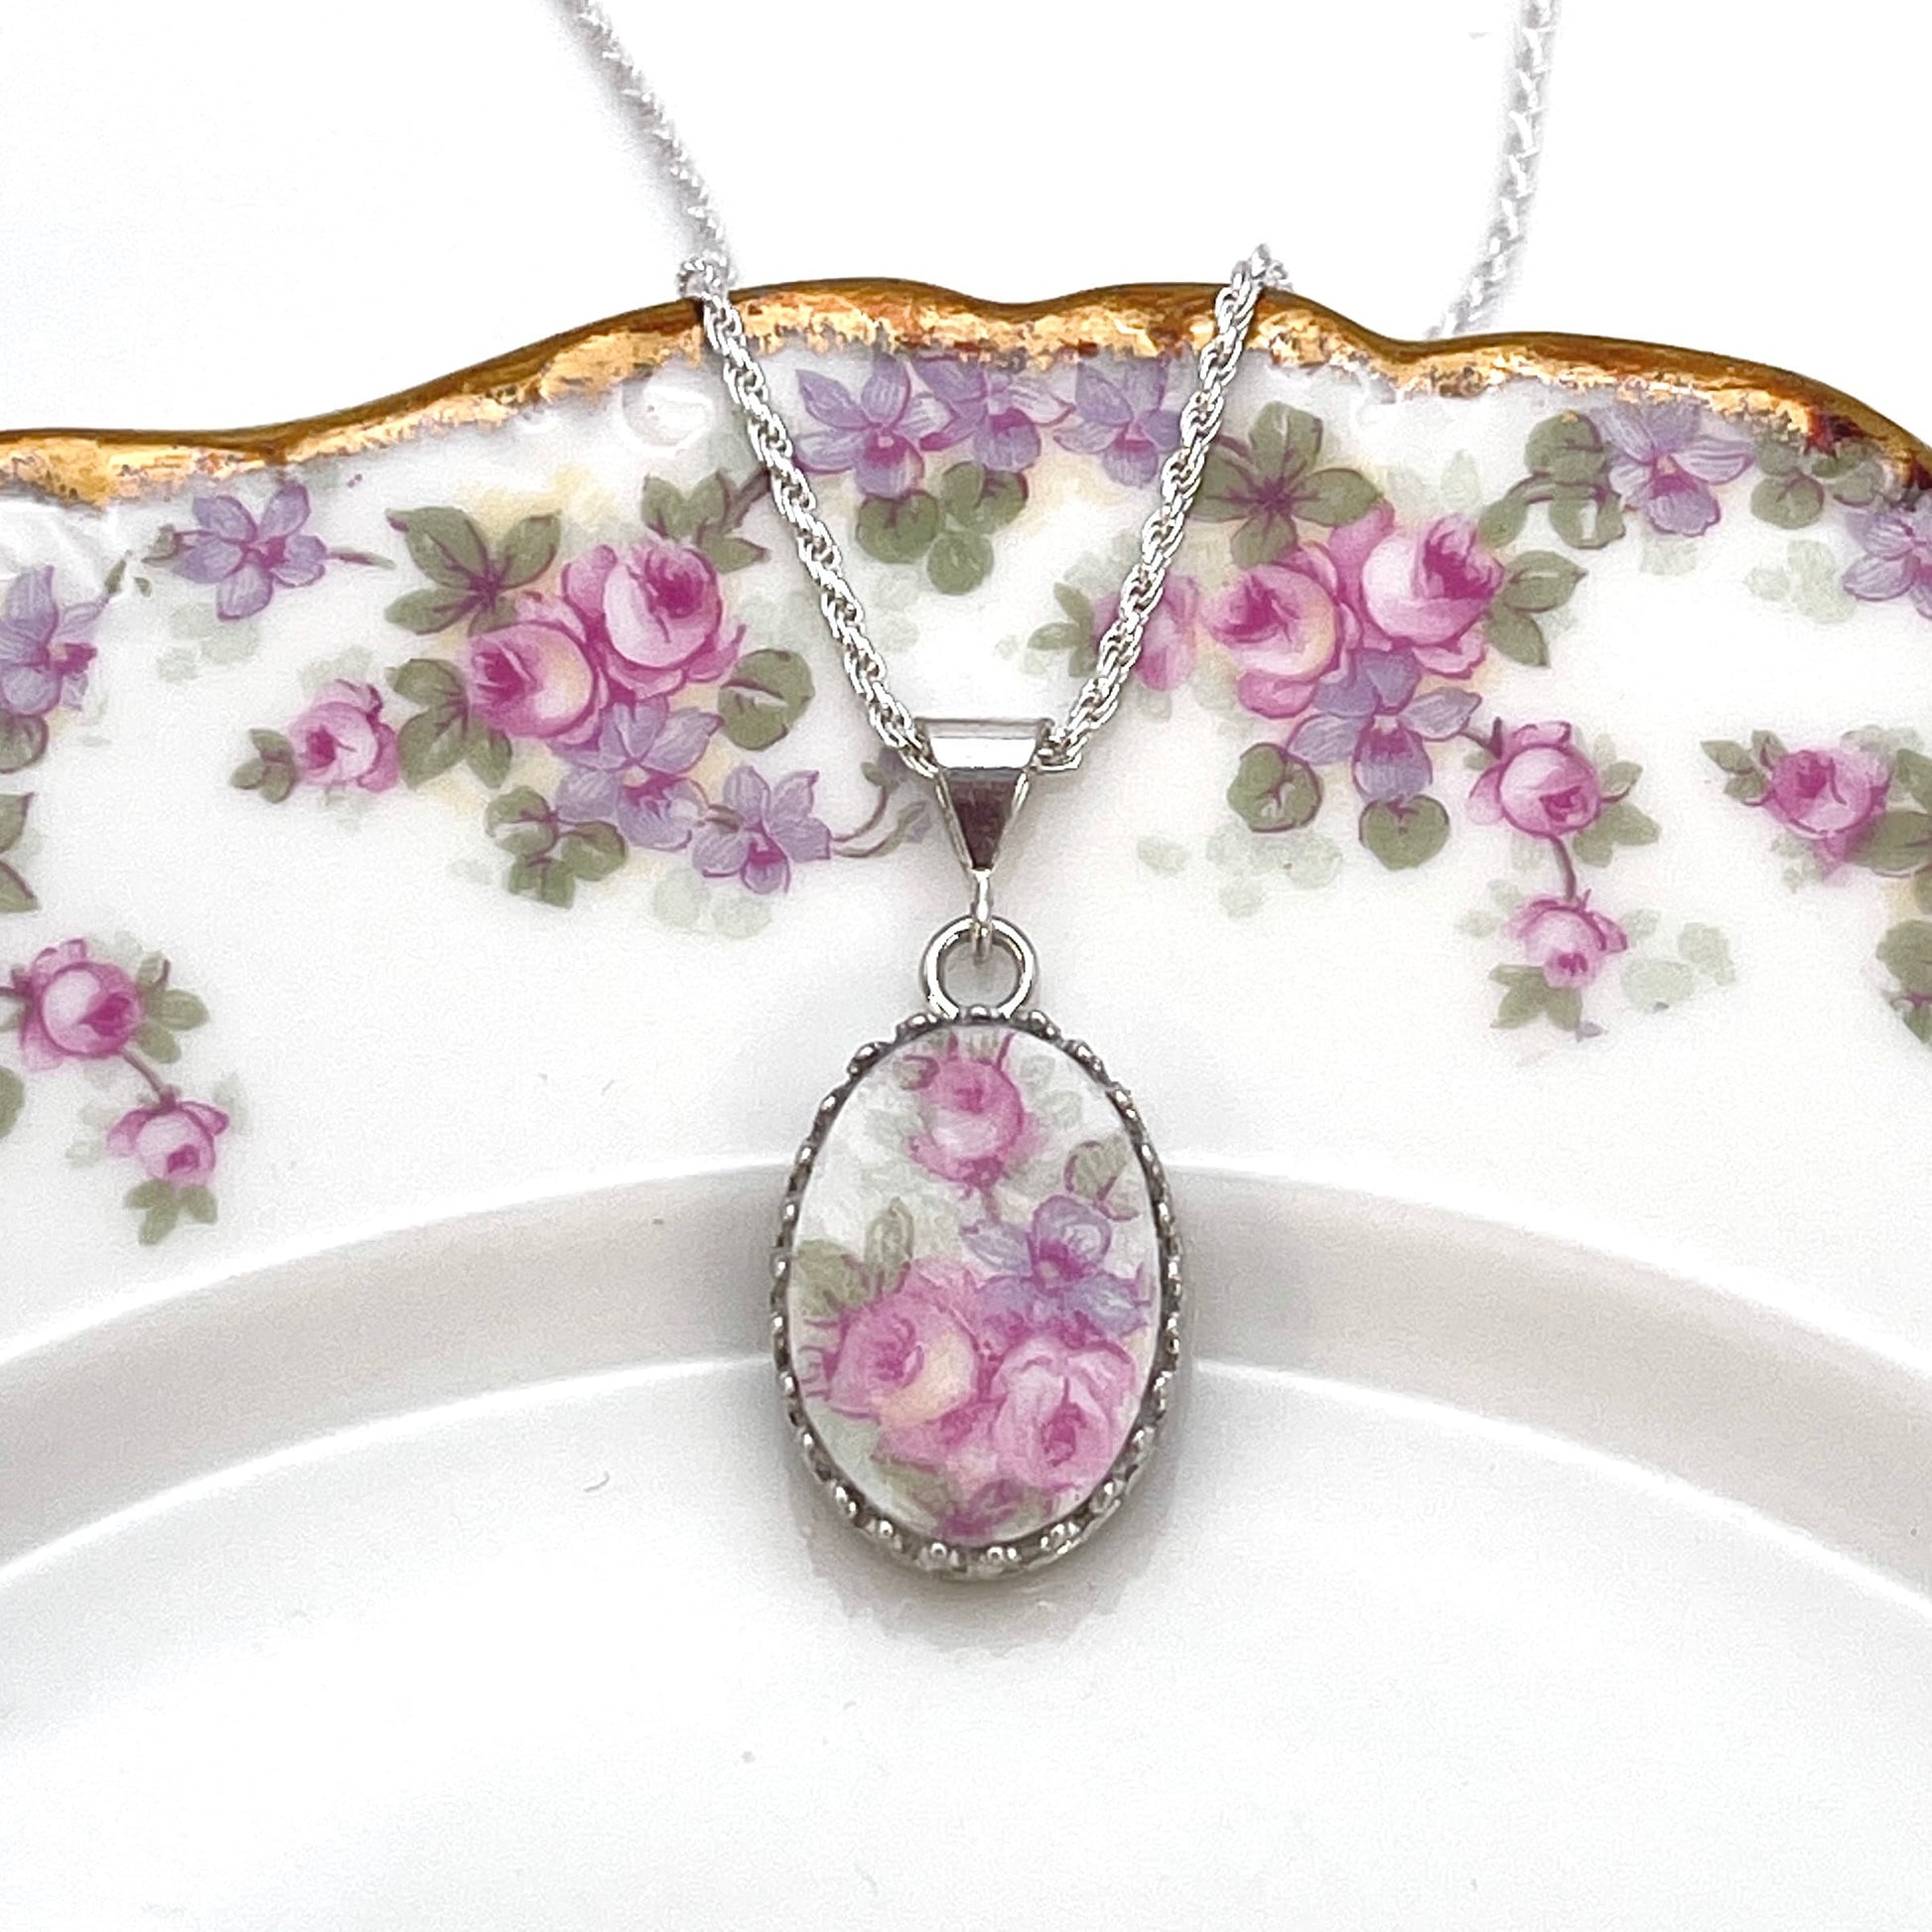 French Limoges Broken China Jewelry, Pink Roses Minimalist Necklace, Unique Birthday Gift for Wife, Gifts for Women